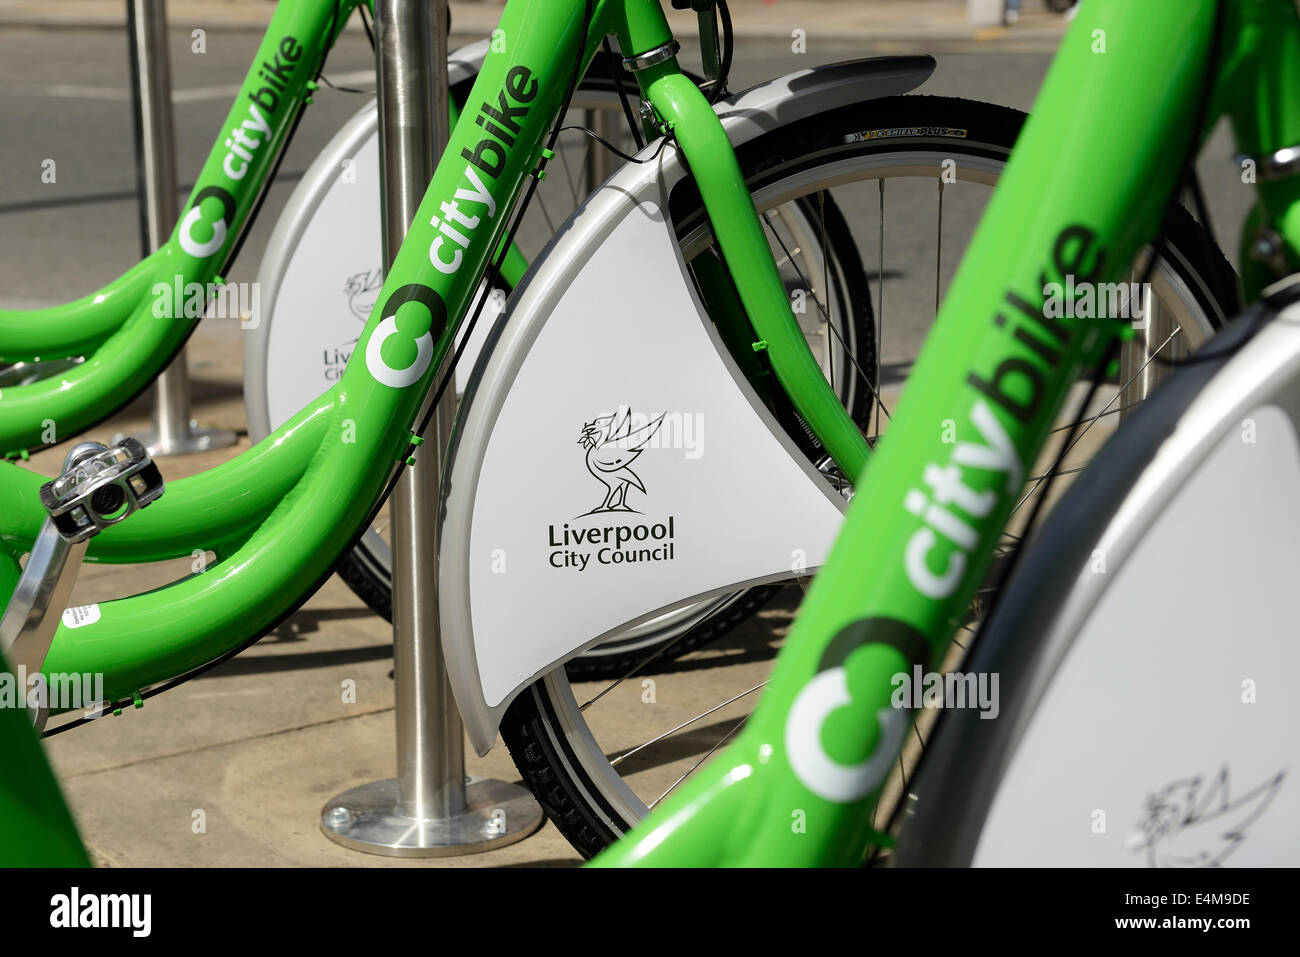 Green bicycles from the Liverpool CIty Council City Bike scheme Stock Photo